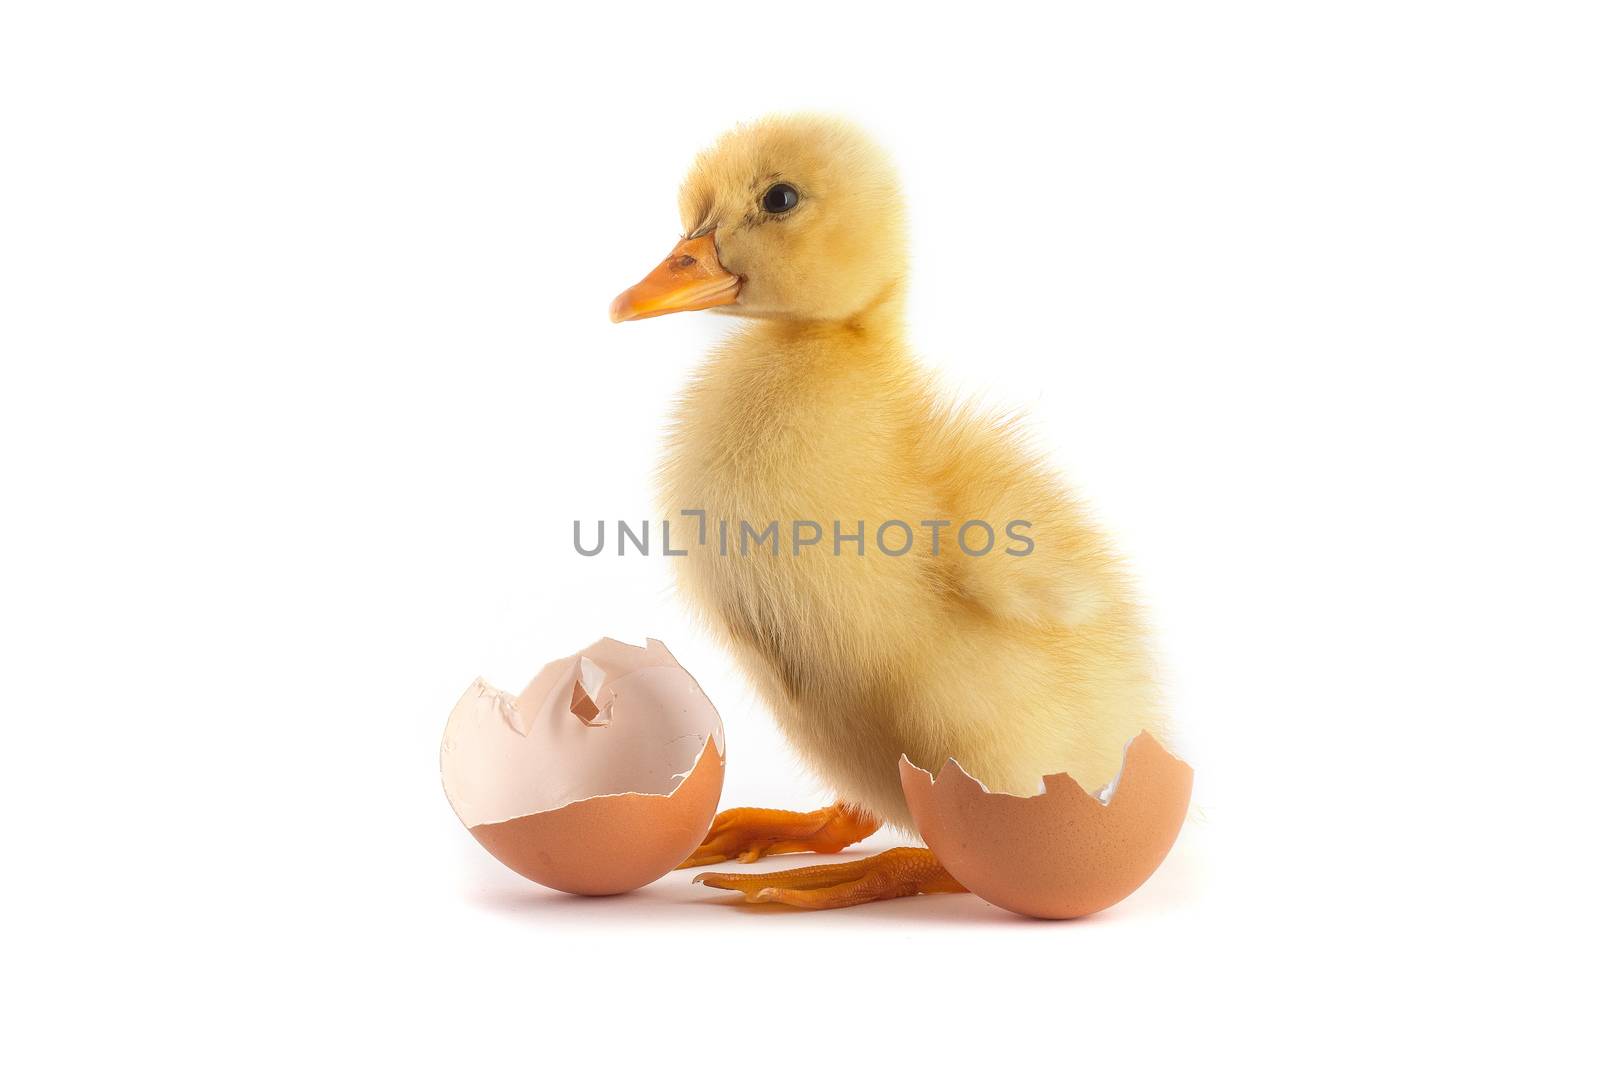 Yellow small duckling with egg isolated on a white background